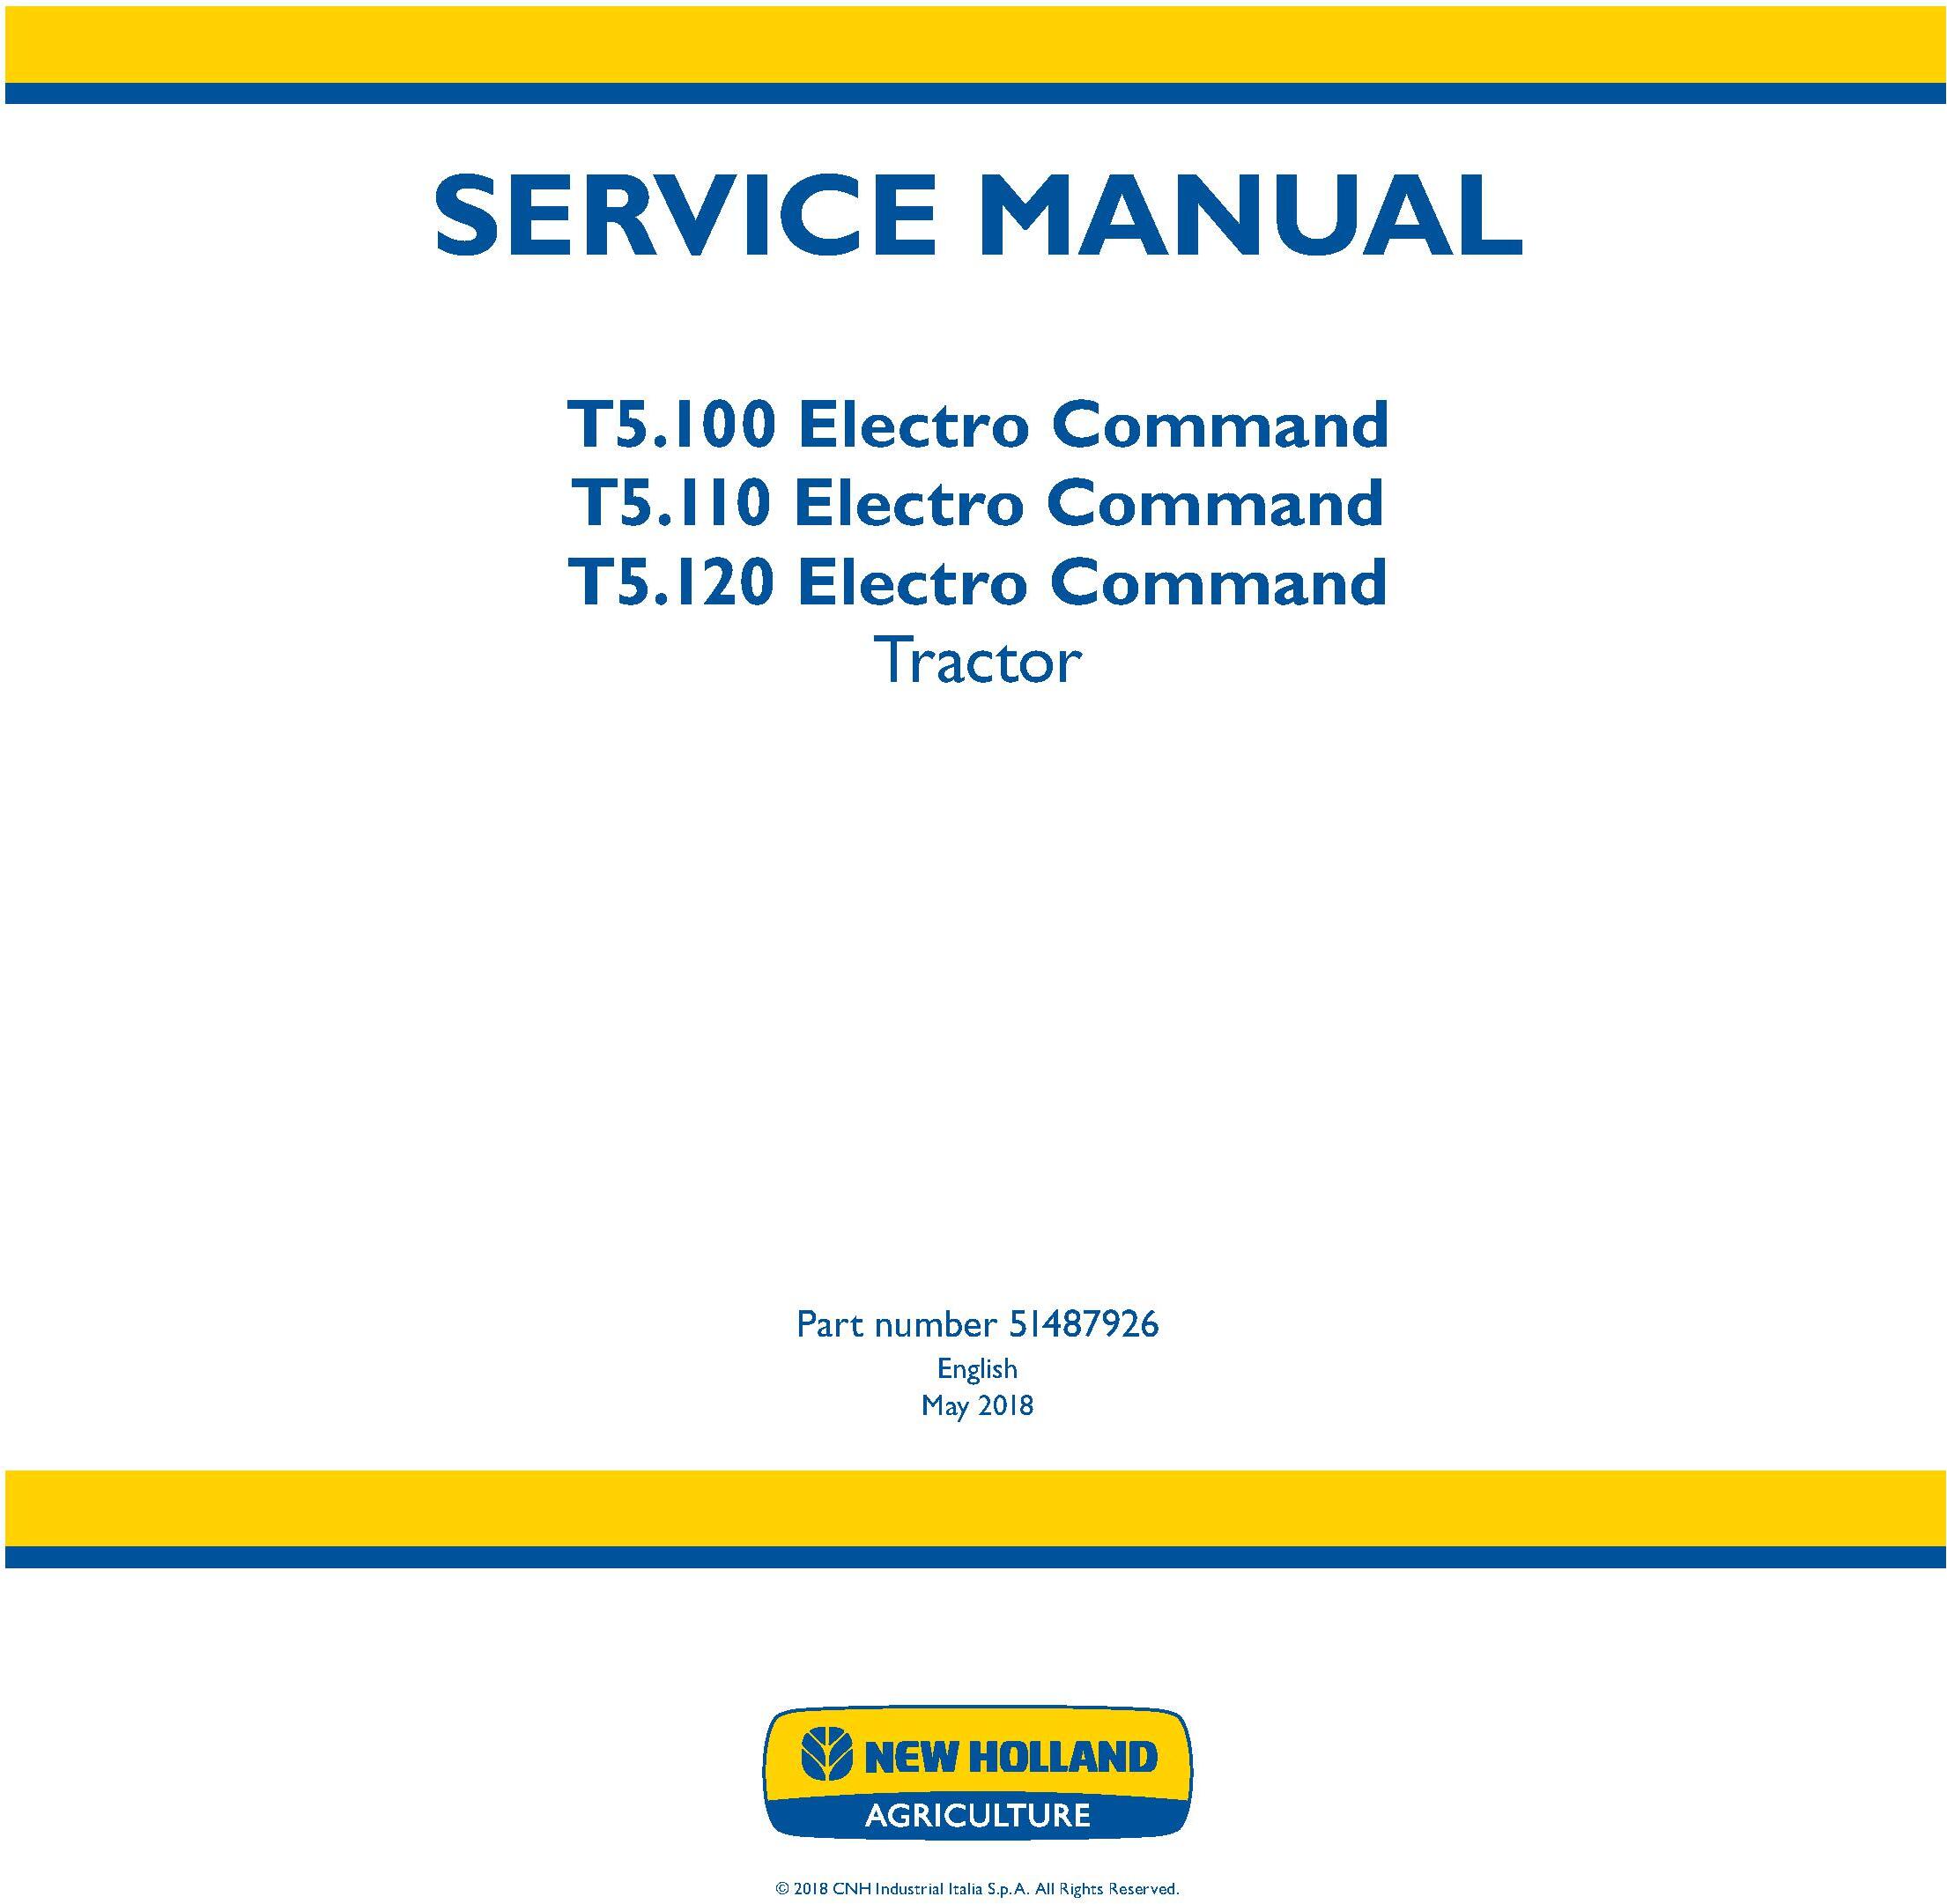 New Holland T5.100, T5.110, T5.120 Electro Command Stage IV Tractor Service Manual